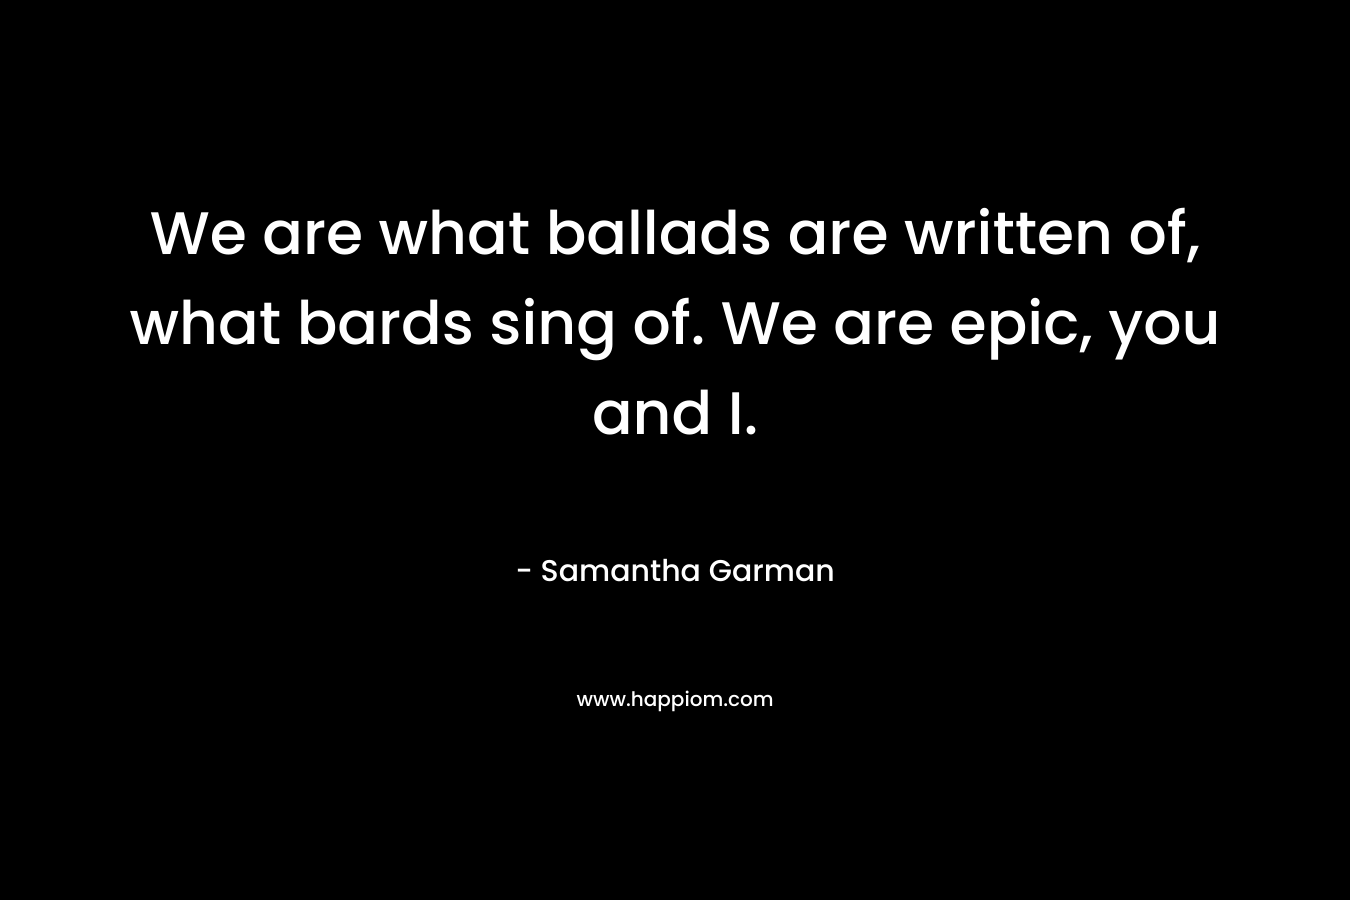 We are what ballads are written of, what bards sing of. We are epic, you and I.